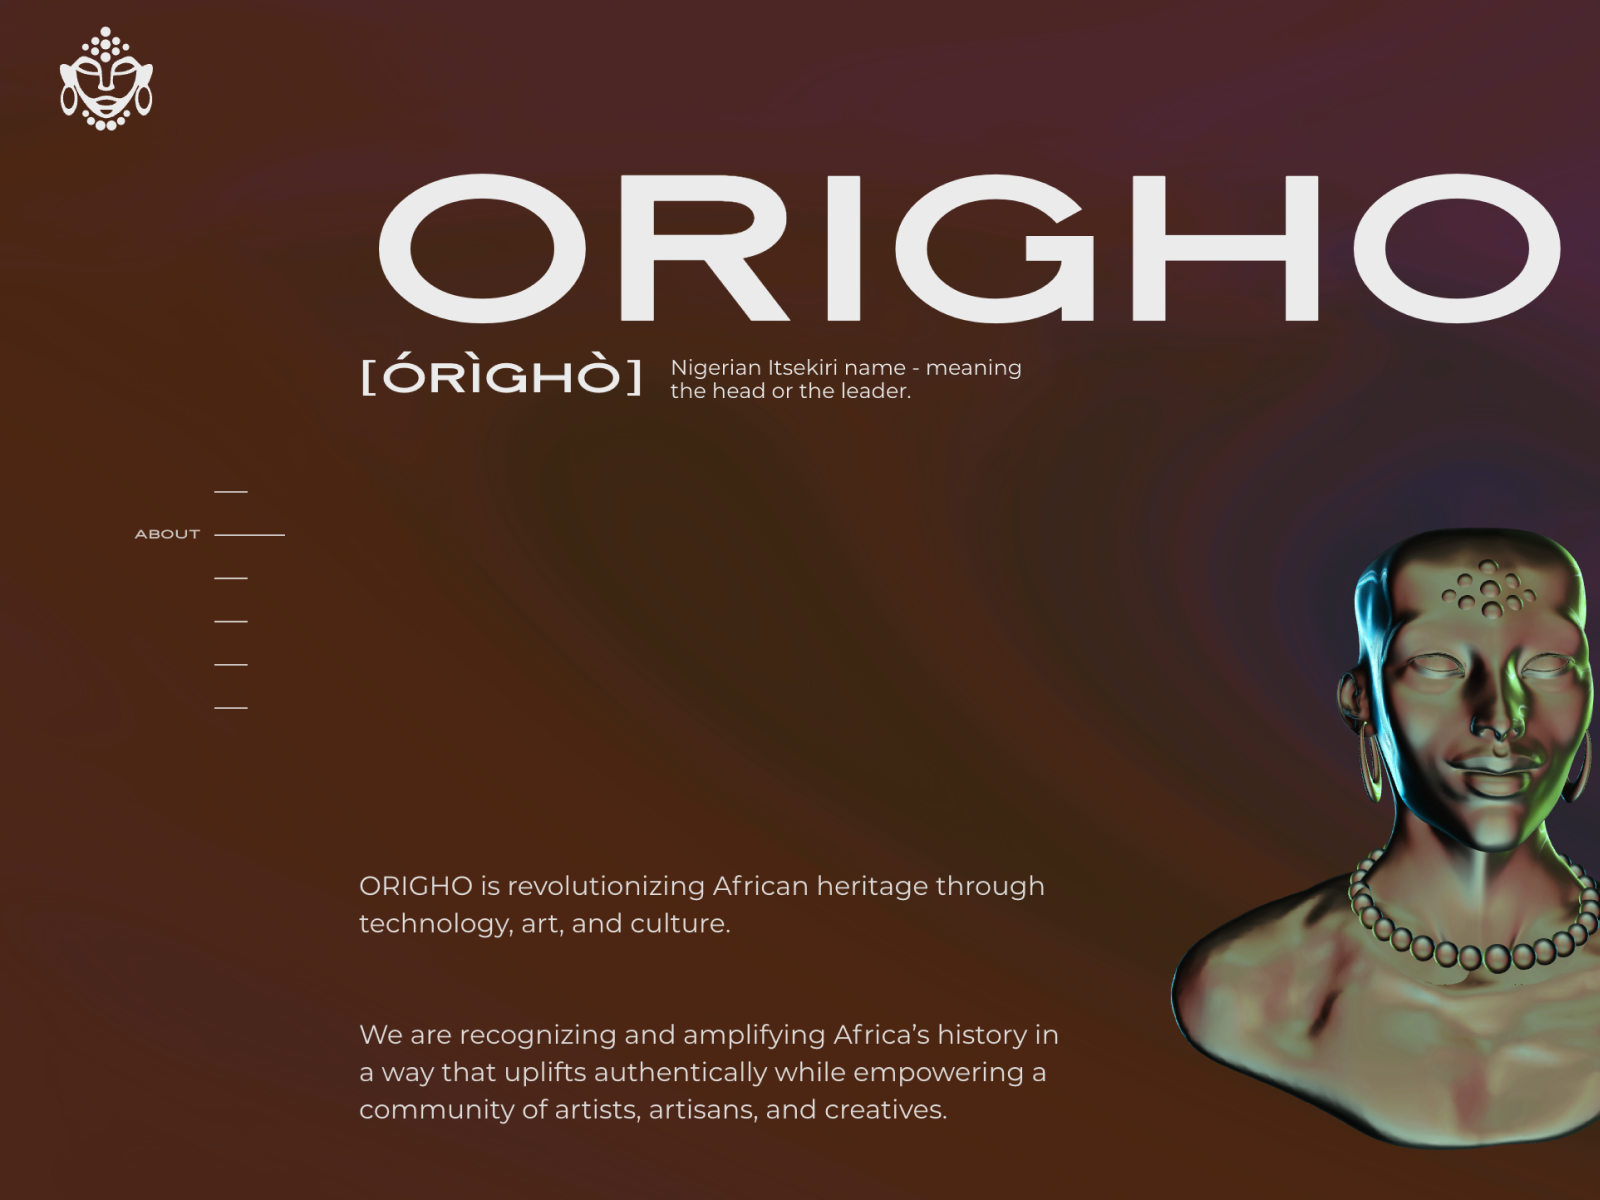 About ORIGHO